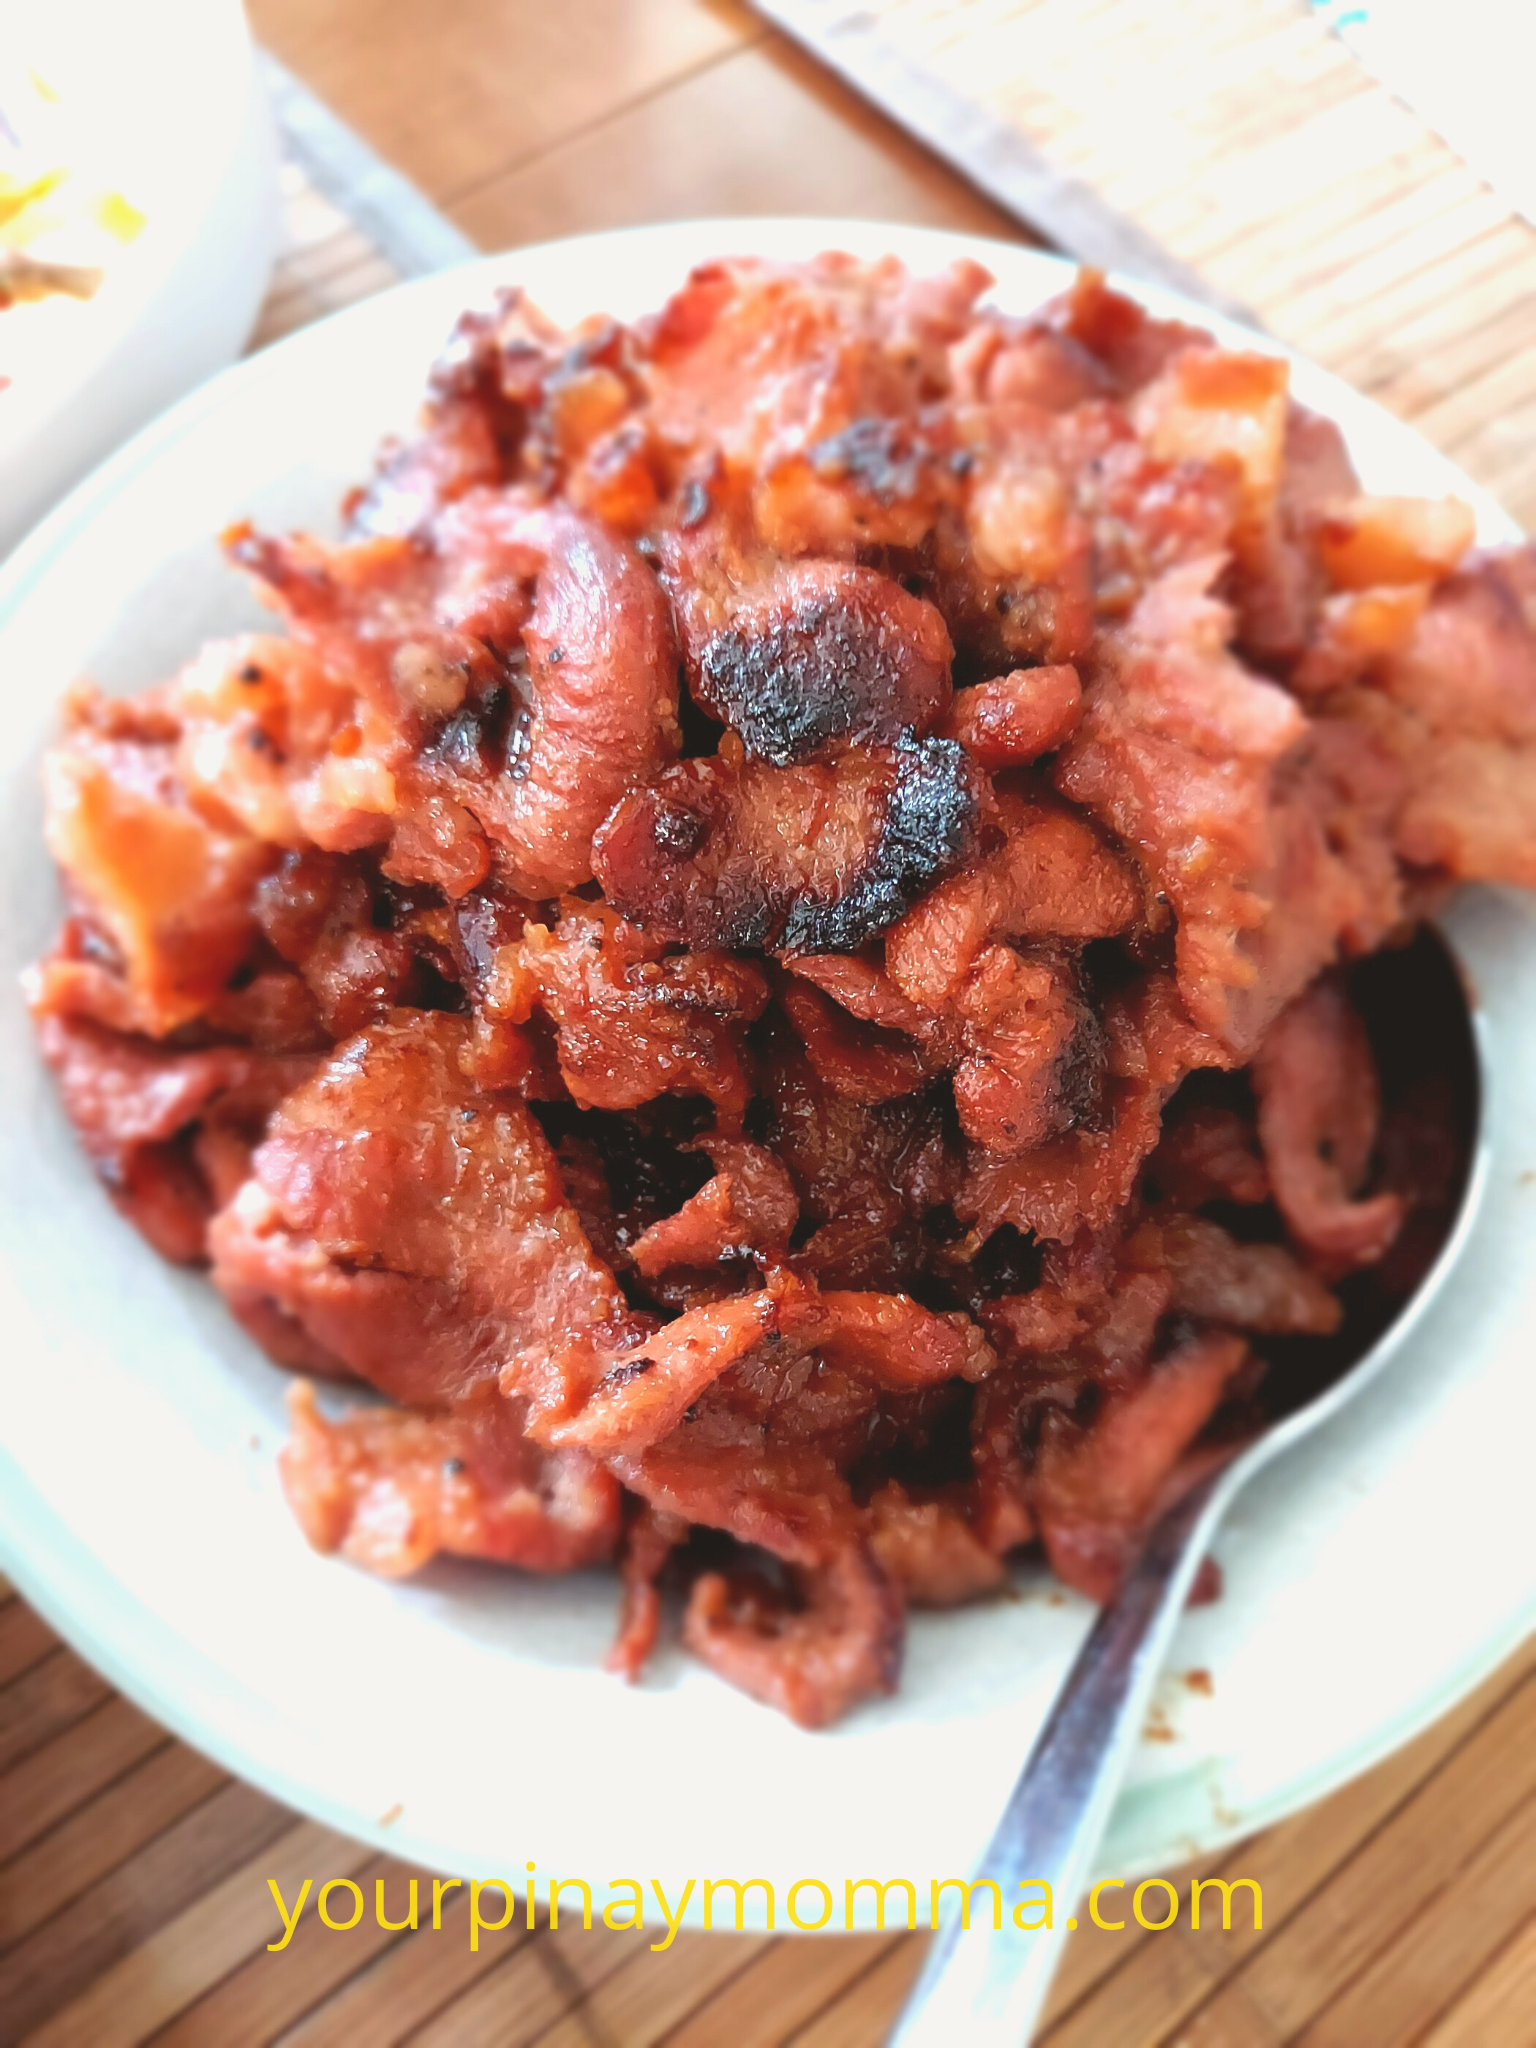 How to cook tocino